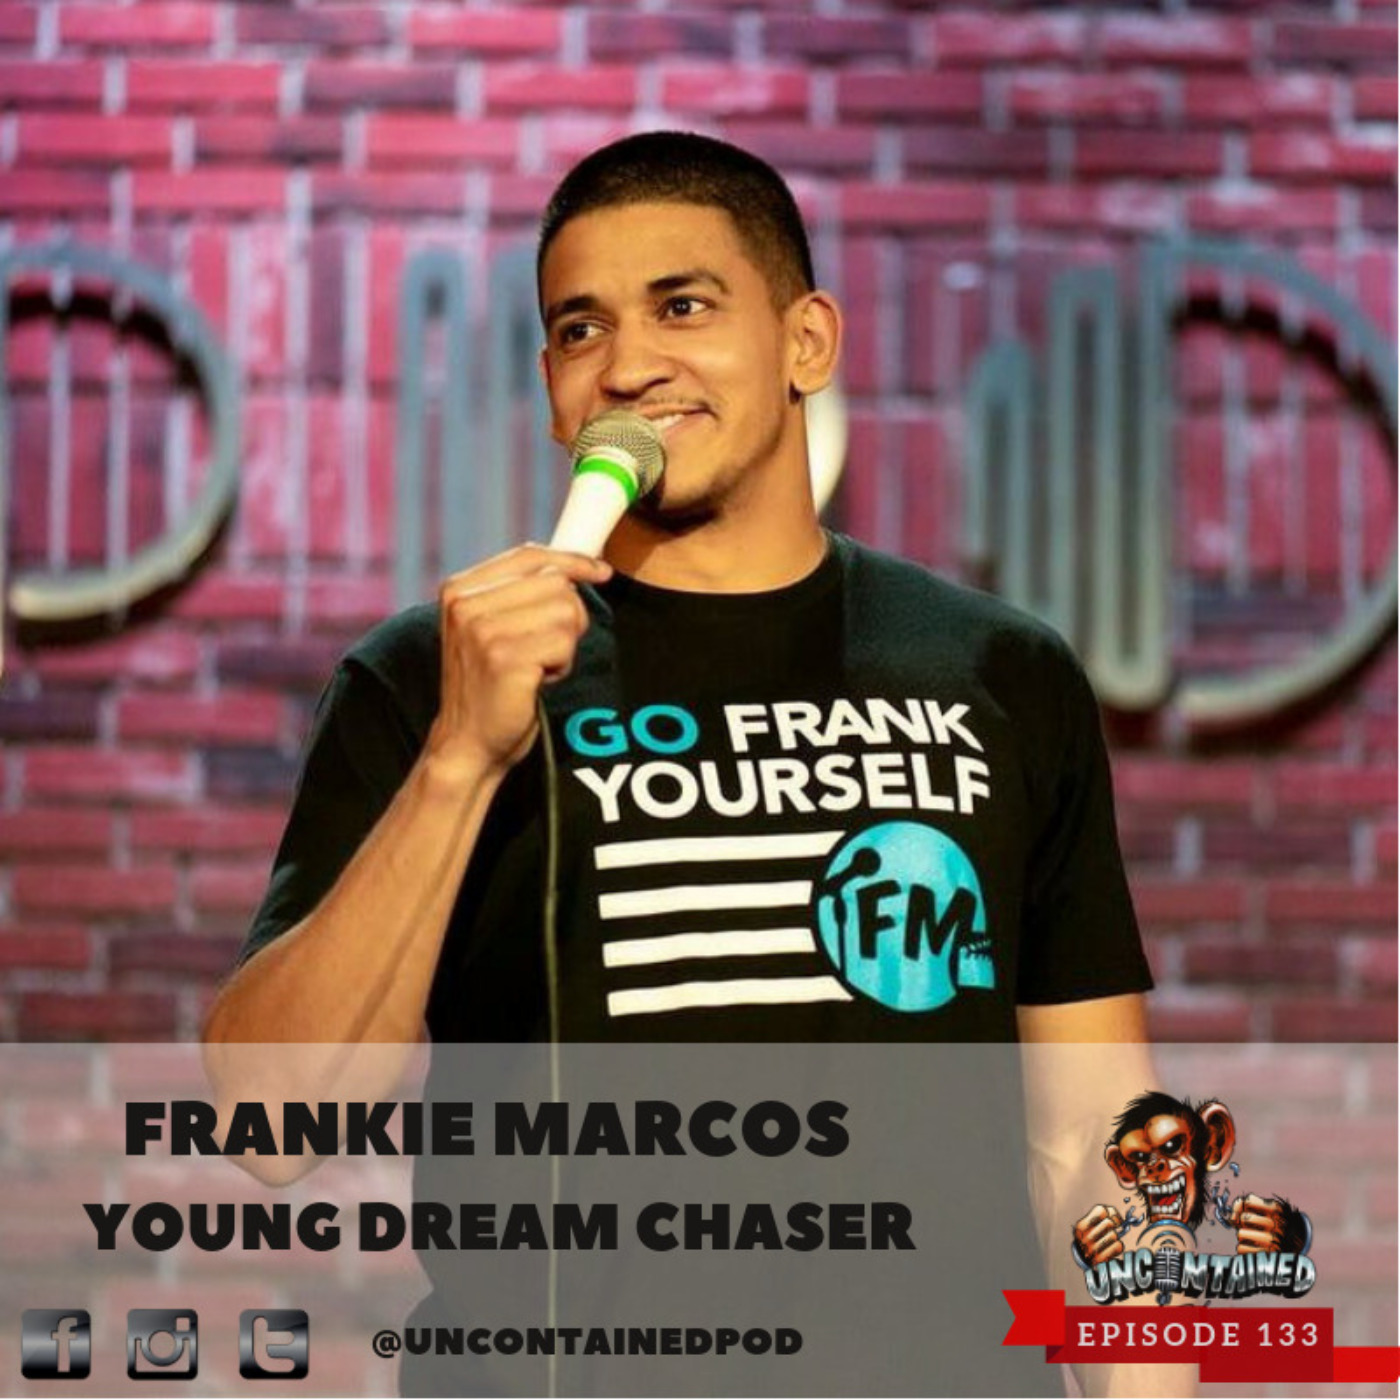 Episode 133: Frankie Marcos - Young Dream Chaser